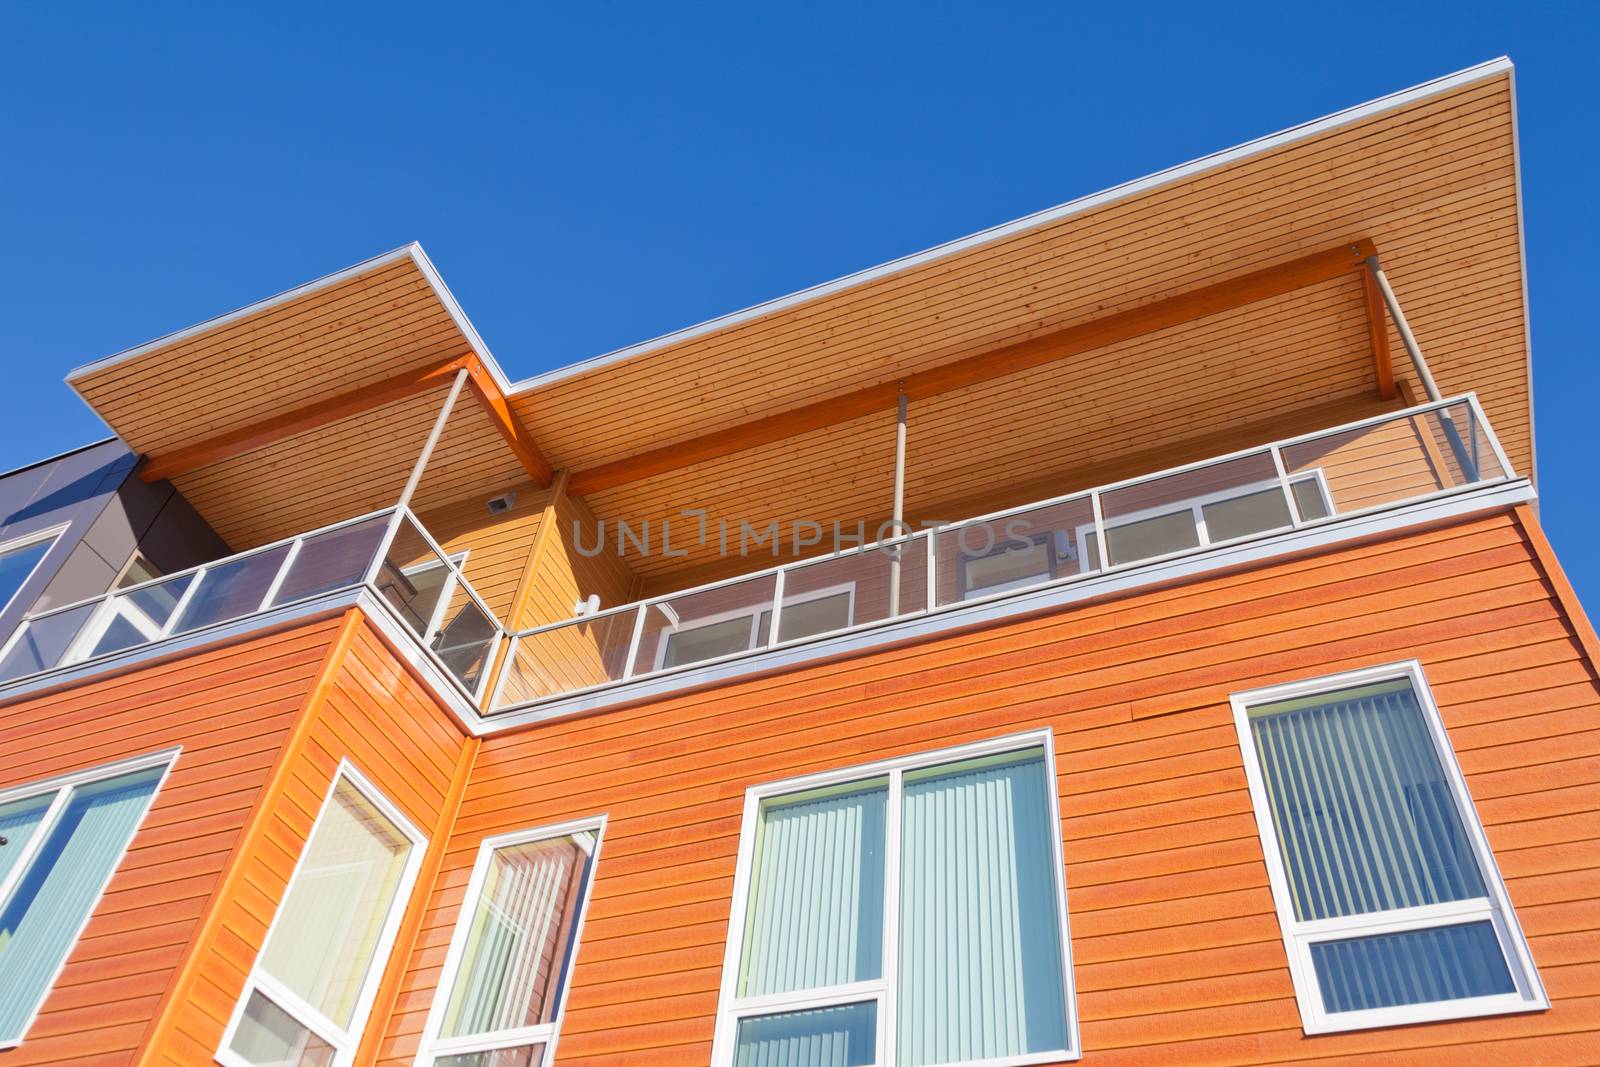 Upper storey detail of timber clad apartment building painted bright with penthouse balcony under blue sky